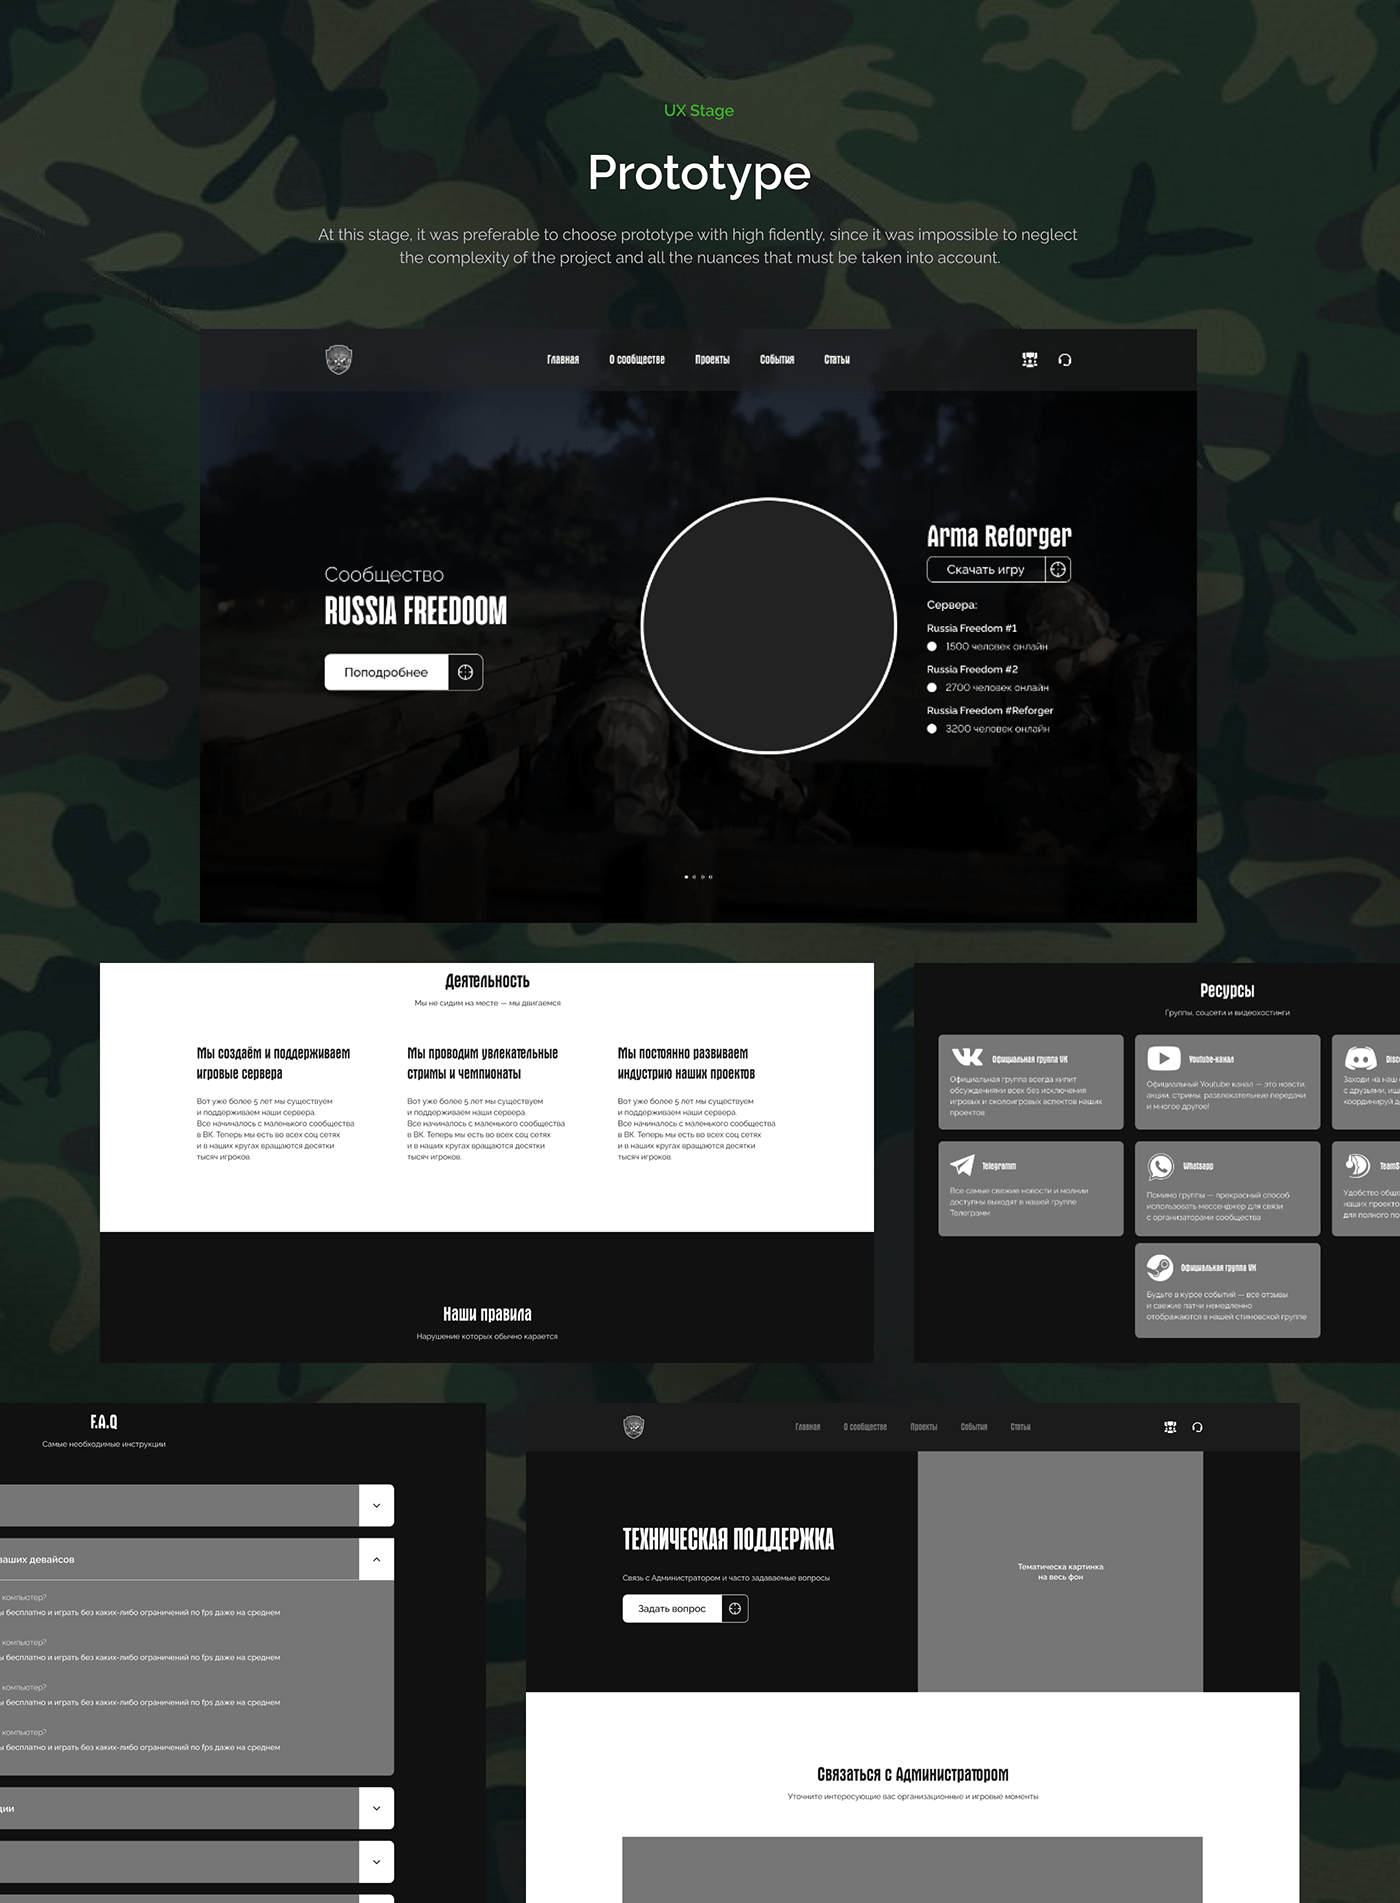 arma dayz design game Shooter site Style UI ux Web